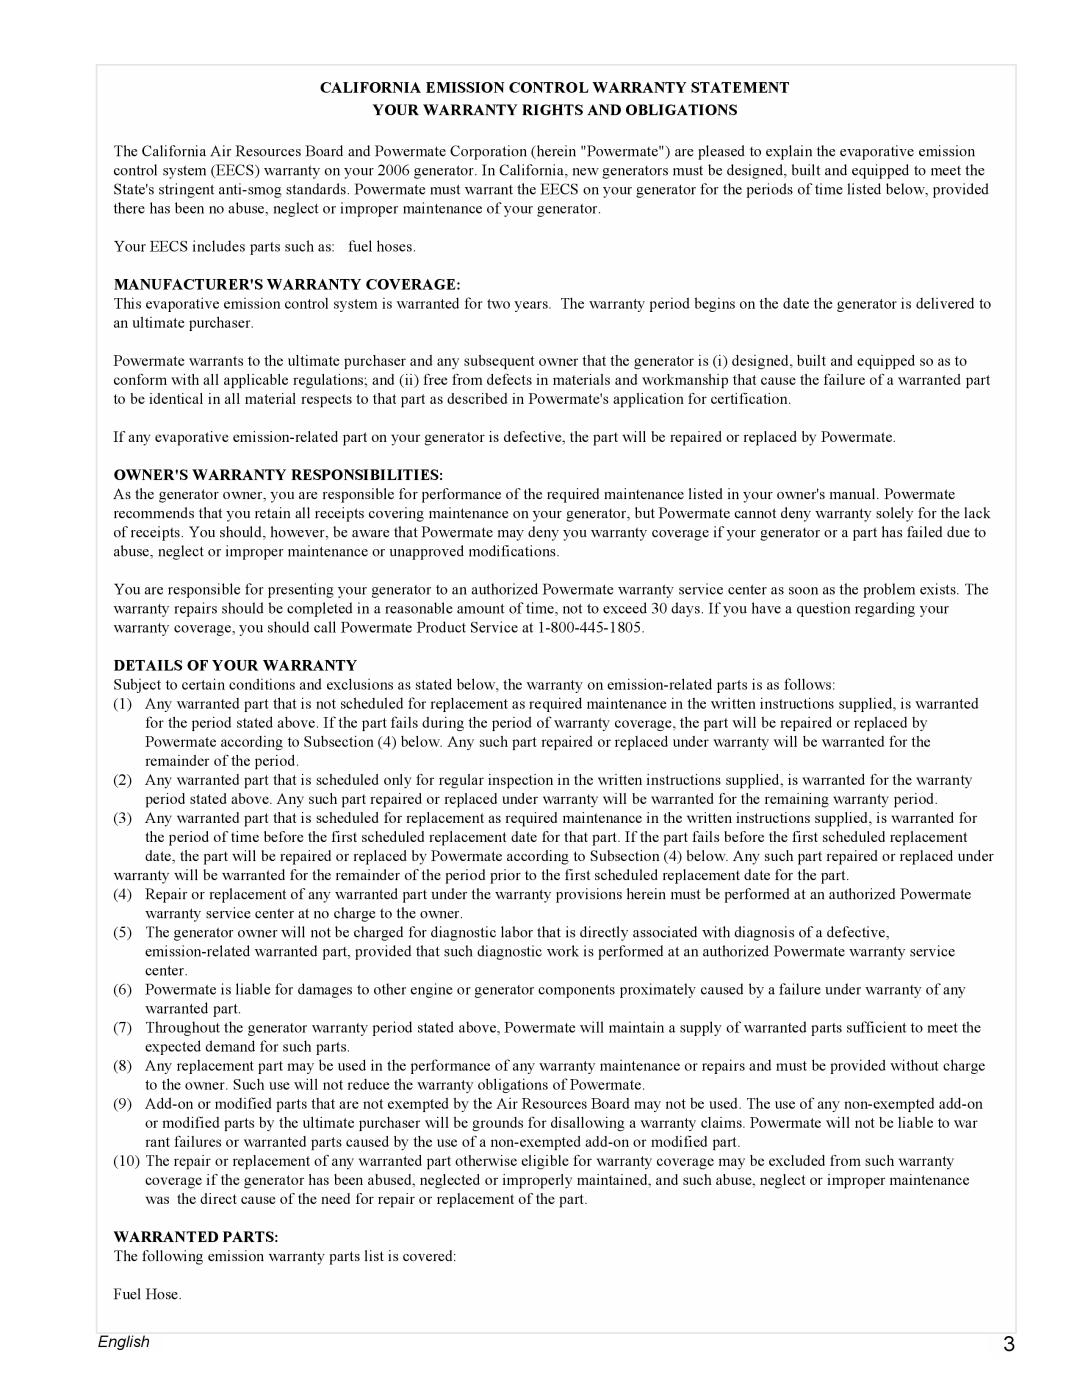 Powermate PMC523202 California Emission Control Warranty Statement, Your Warranty Rights And Obligations, Warranted Parts 